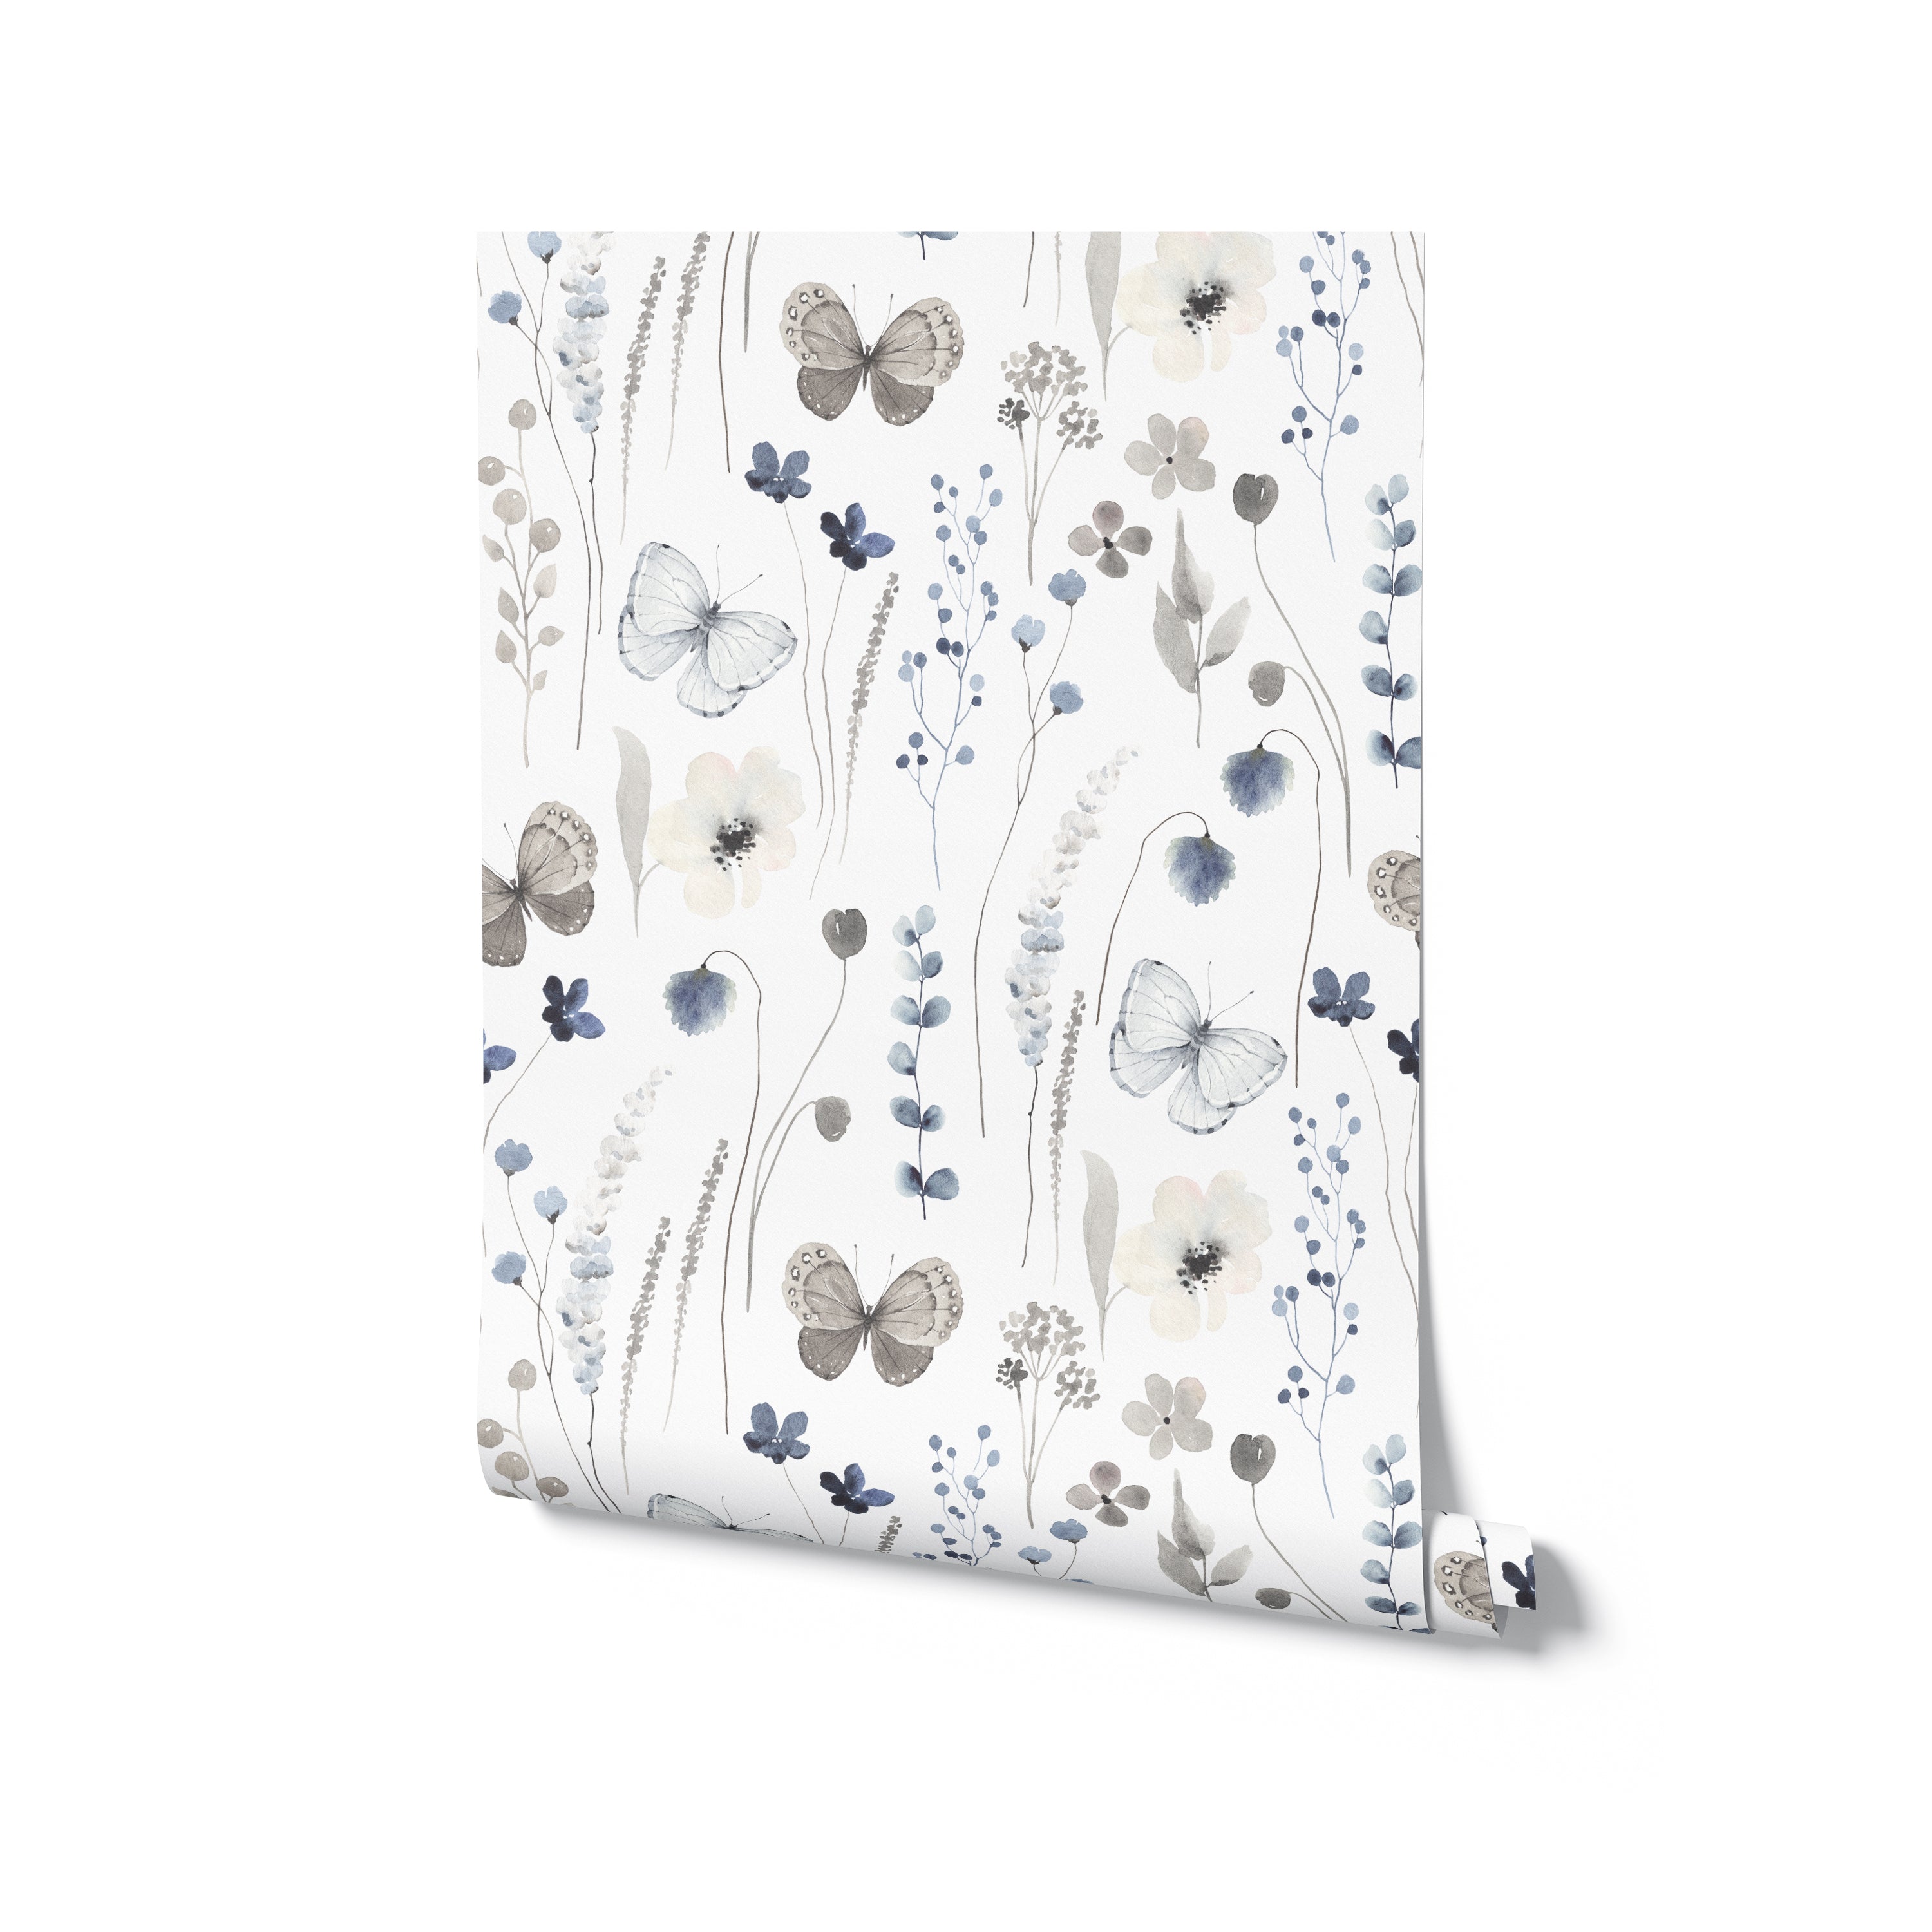 A rolled-up piece of Soft Flutter Wallpaper against a white background, showcasing the gentle botanical and butterfly design in watercolor blues and grays, ideal for creating a calming environment in home interiors.